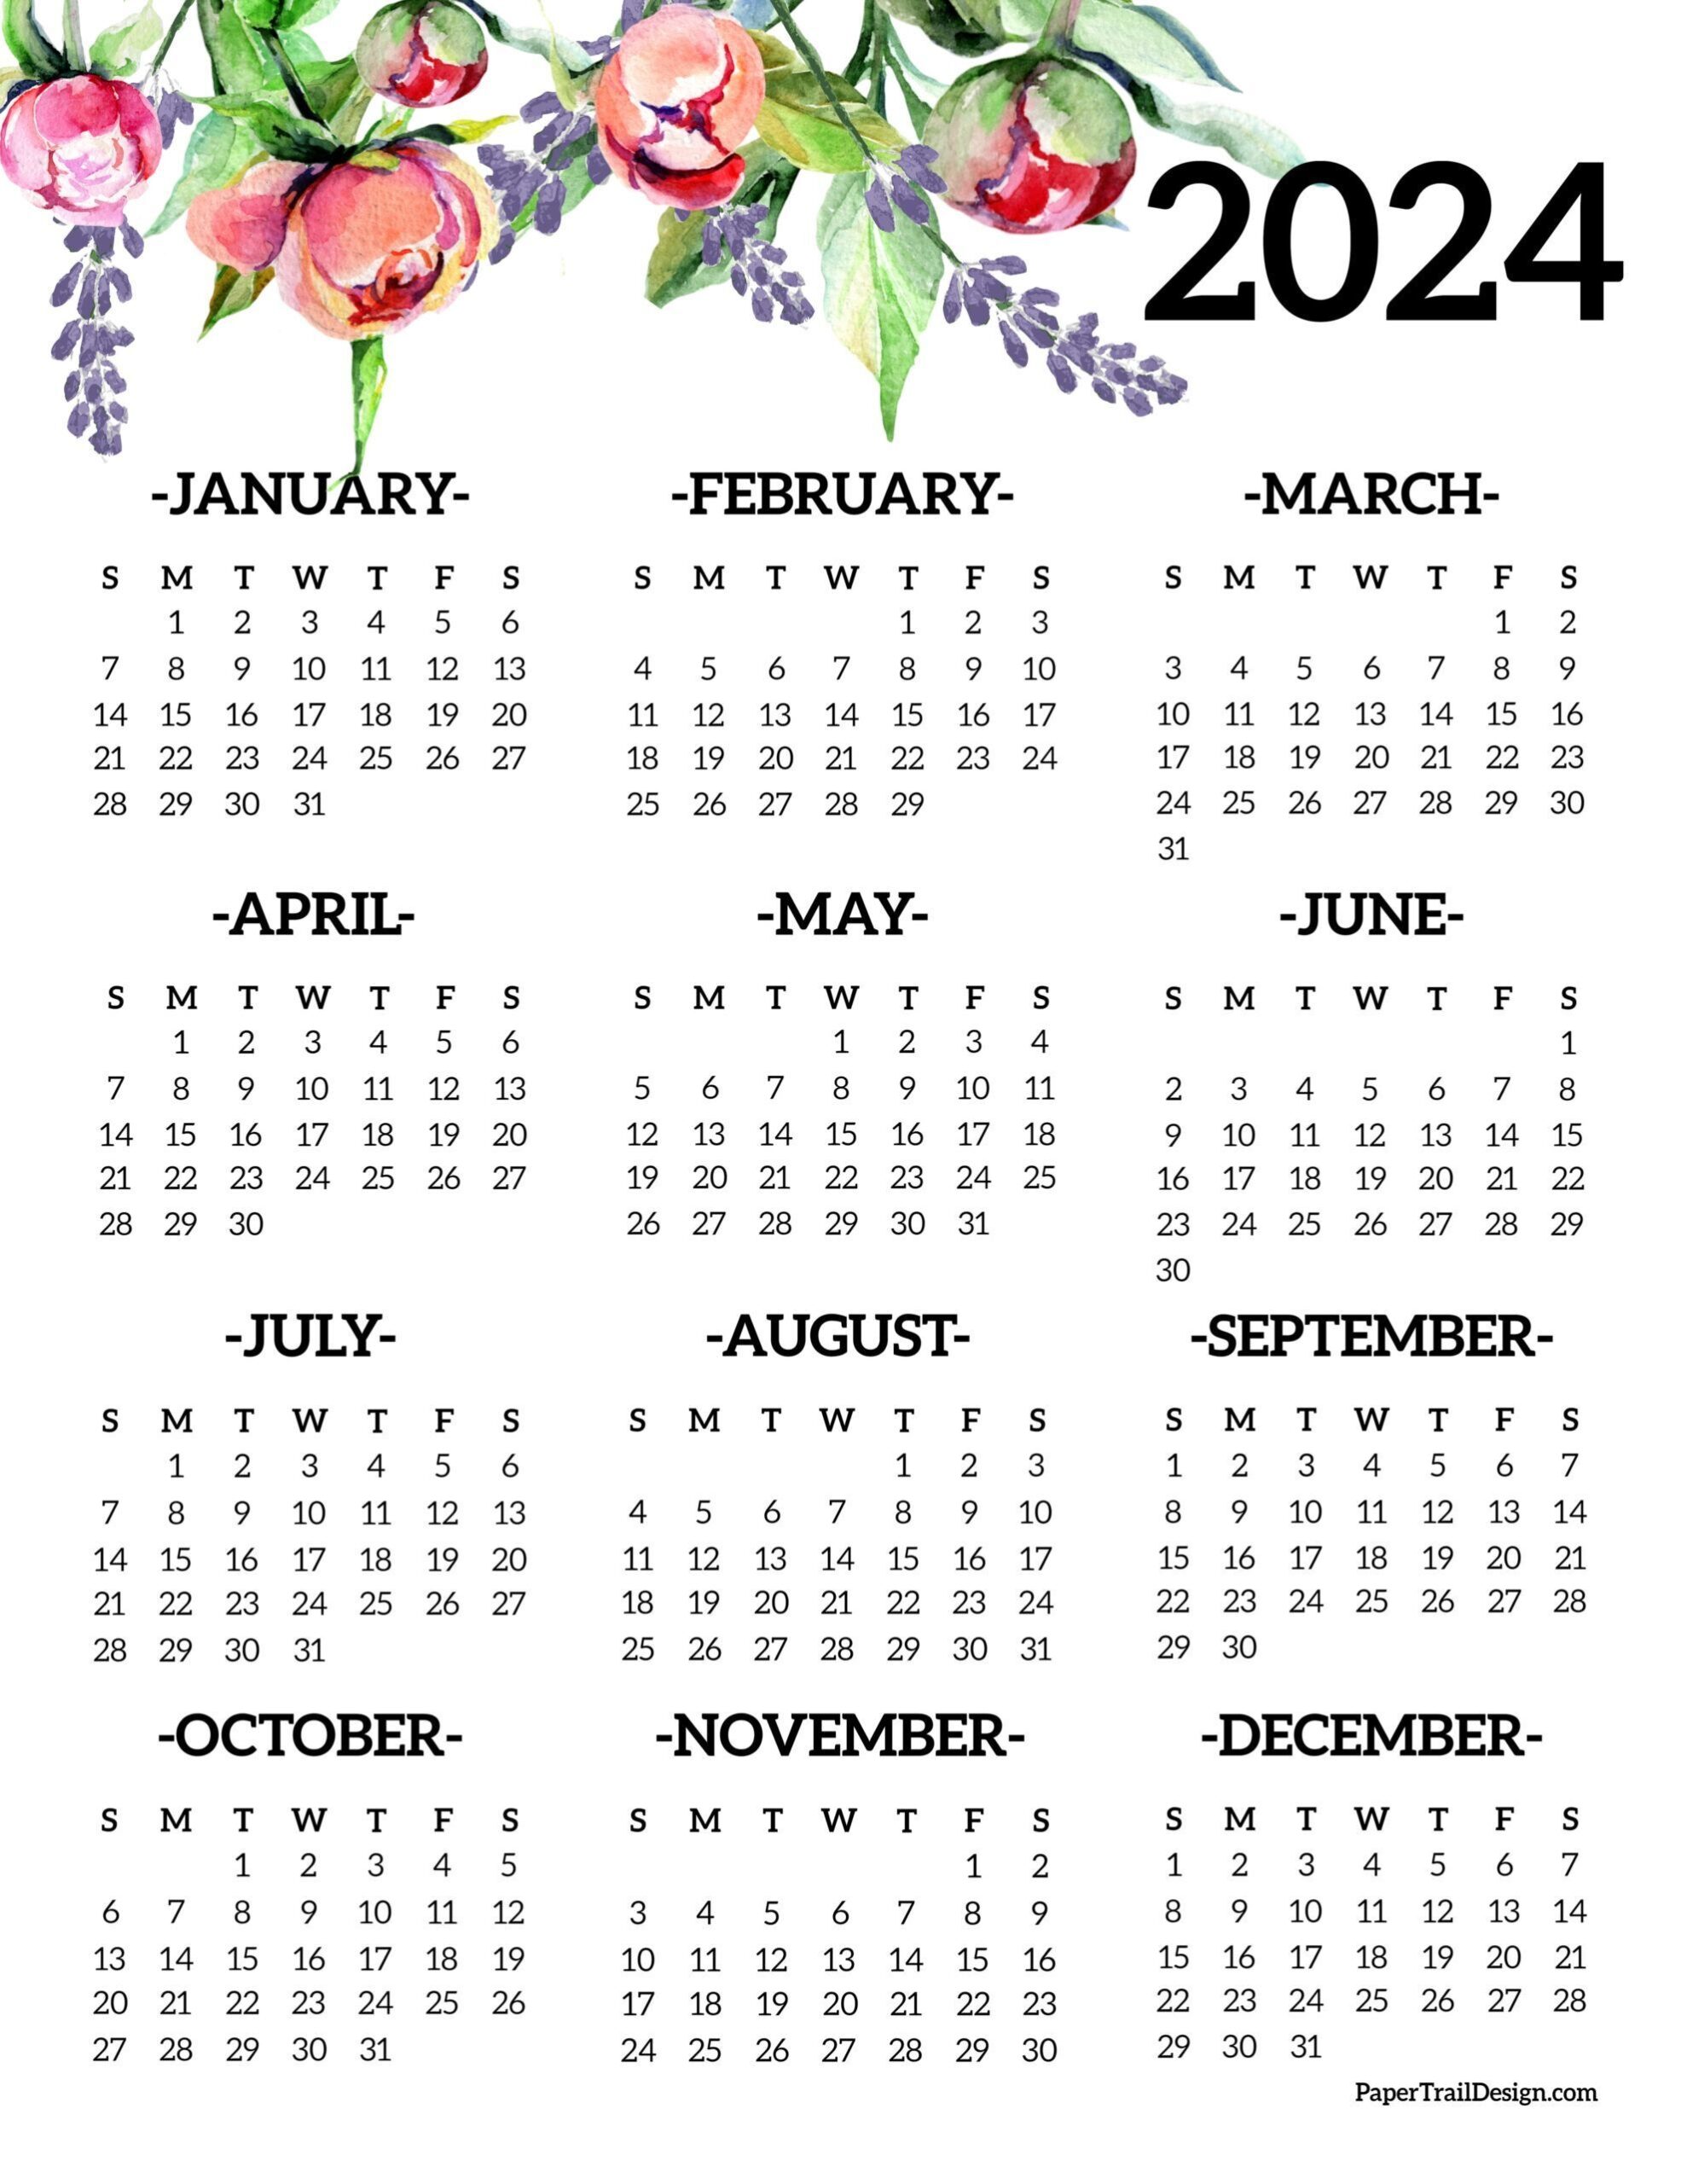 Calendar 2024 Printable One Page | Paper Trail Design | Free within Free Printable Calendar 2024 Paper Trail Design